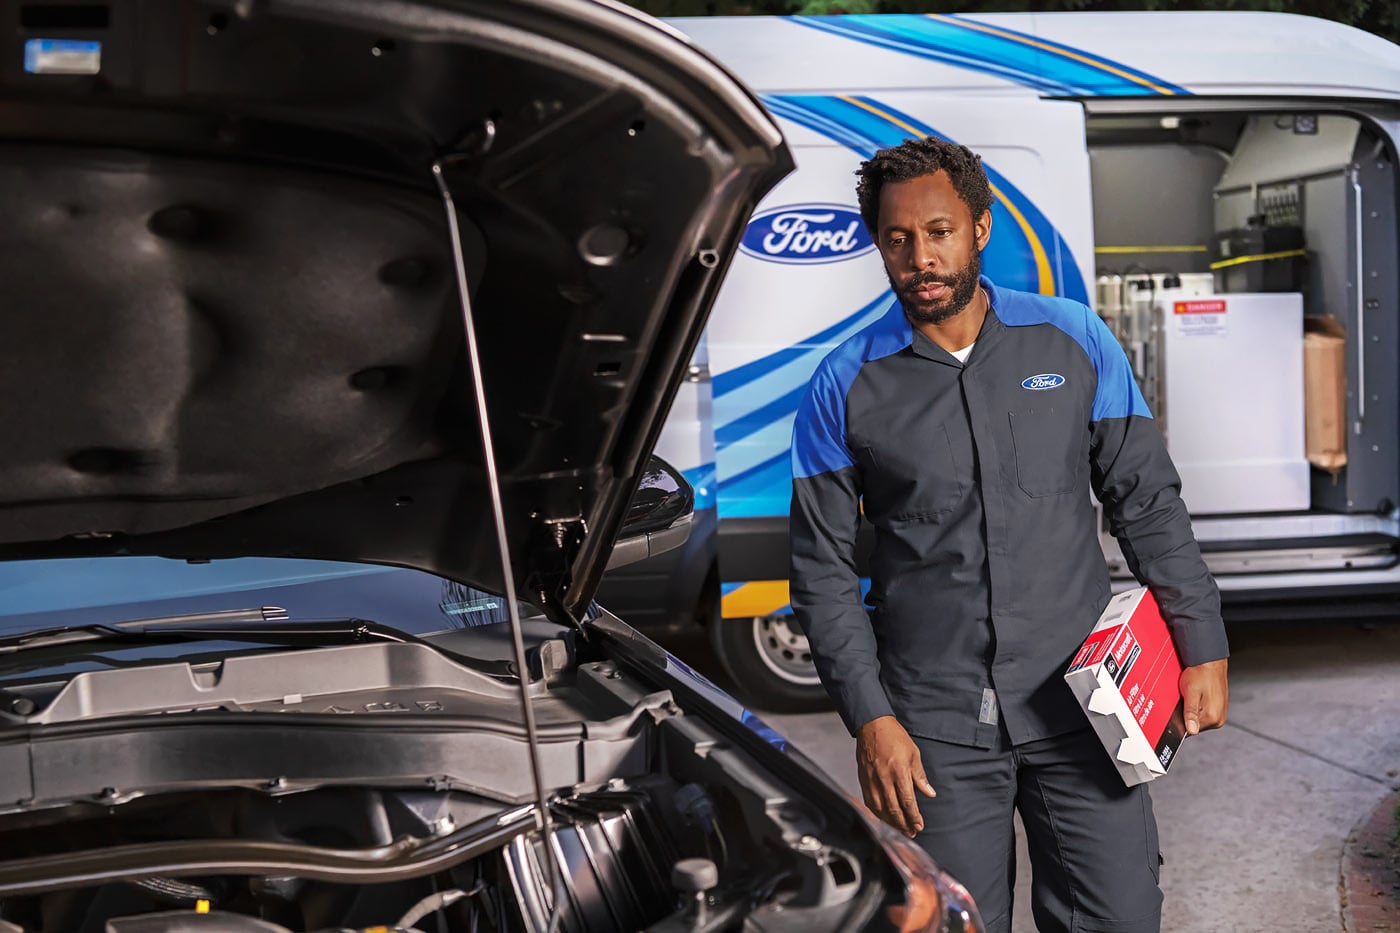 Ford Mobile Service | Bergstrom Ford of Green Bay in Green Bay WI